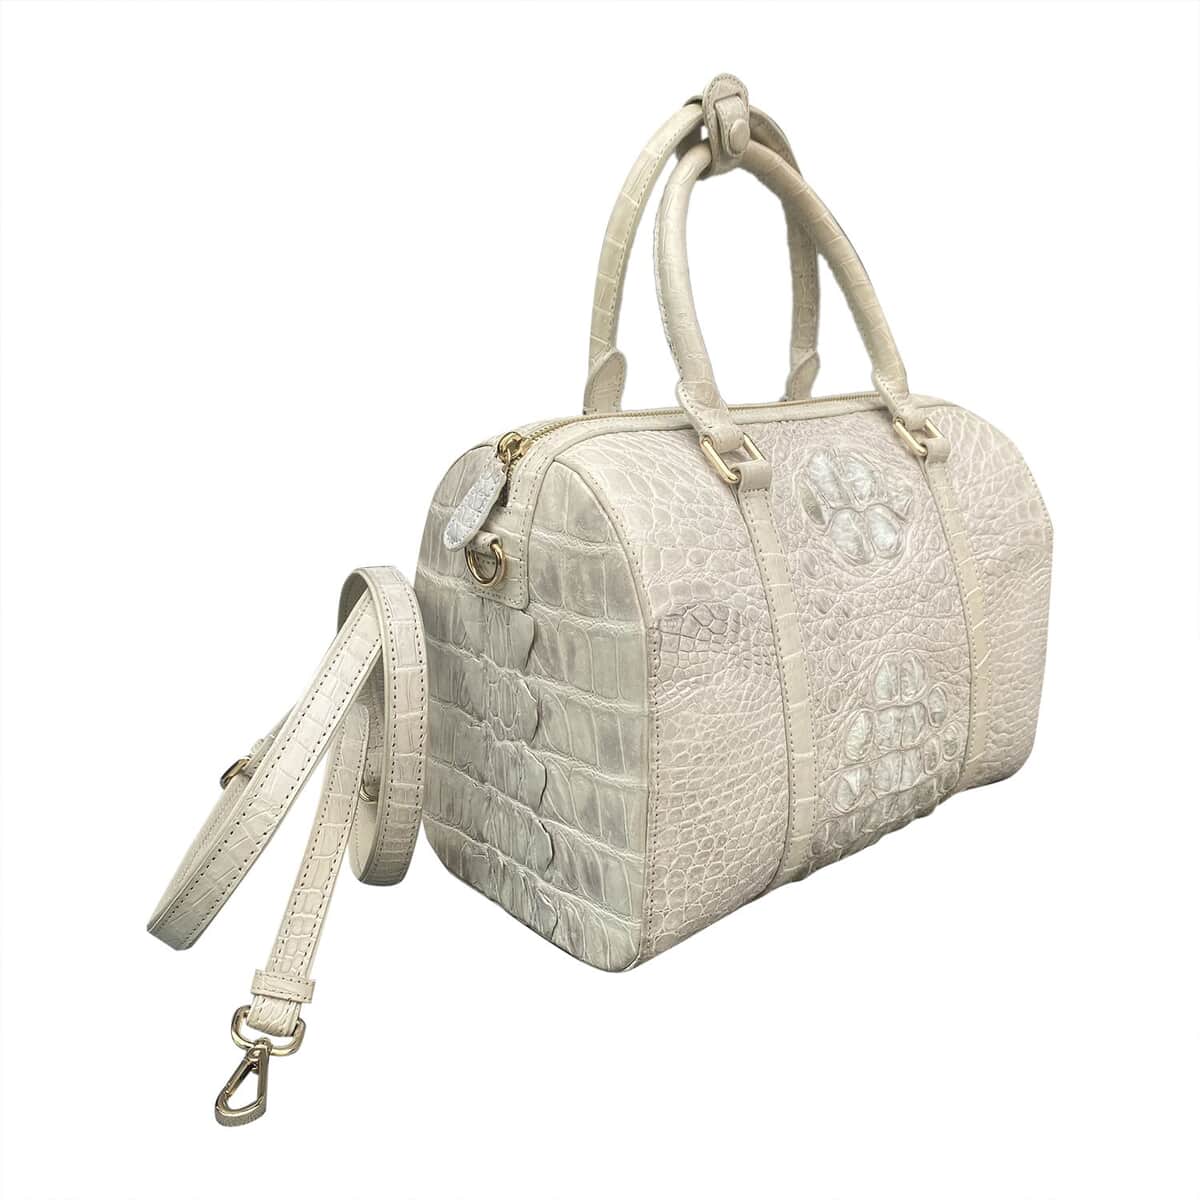 Grand Pelle Genuine Crocodile Leather Natural White Tote Bag (11.81"x5.9"x7.87") with Detachable Shoulder Strap image number 3